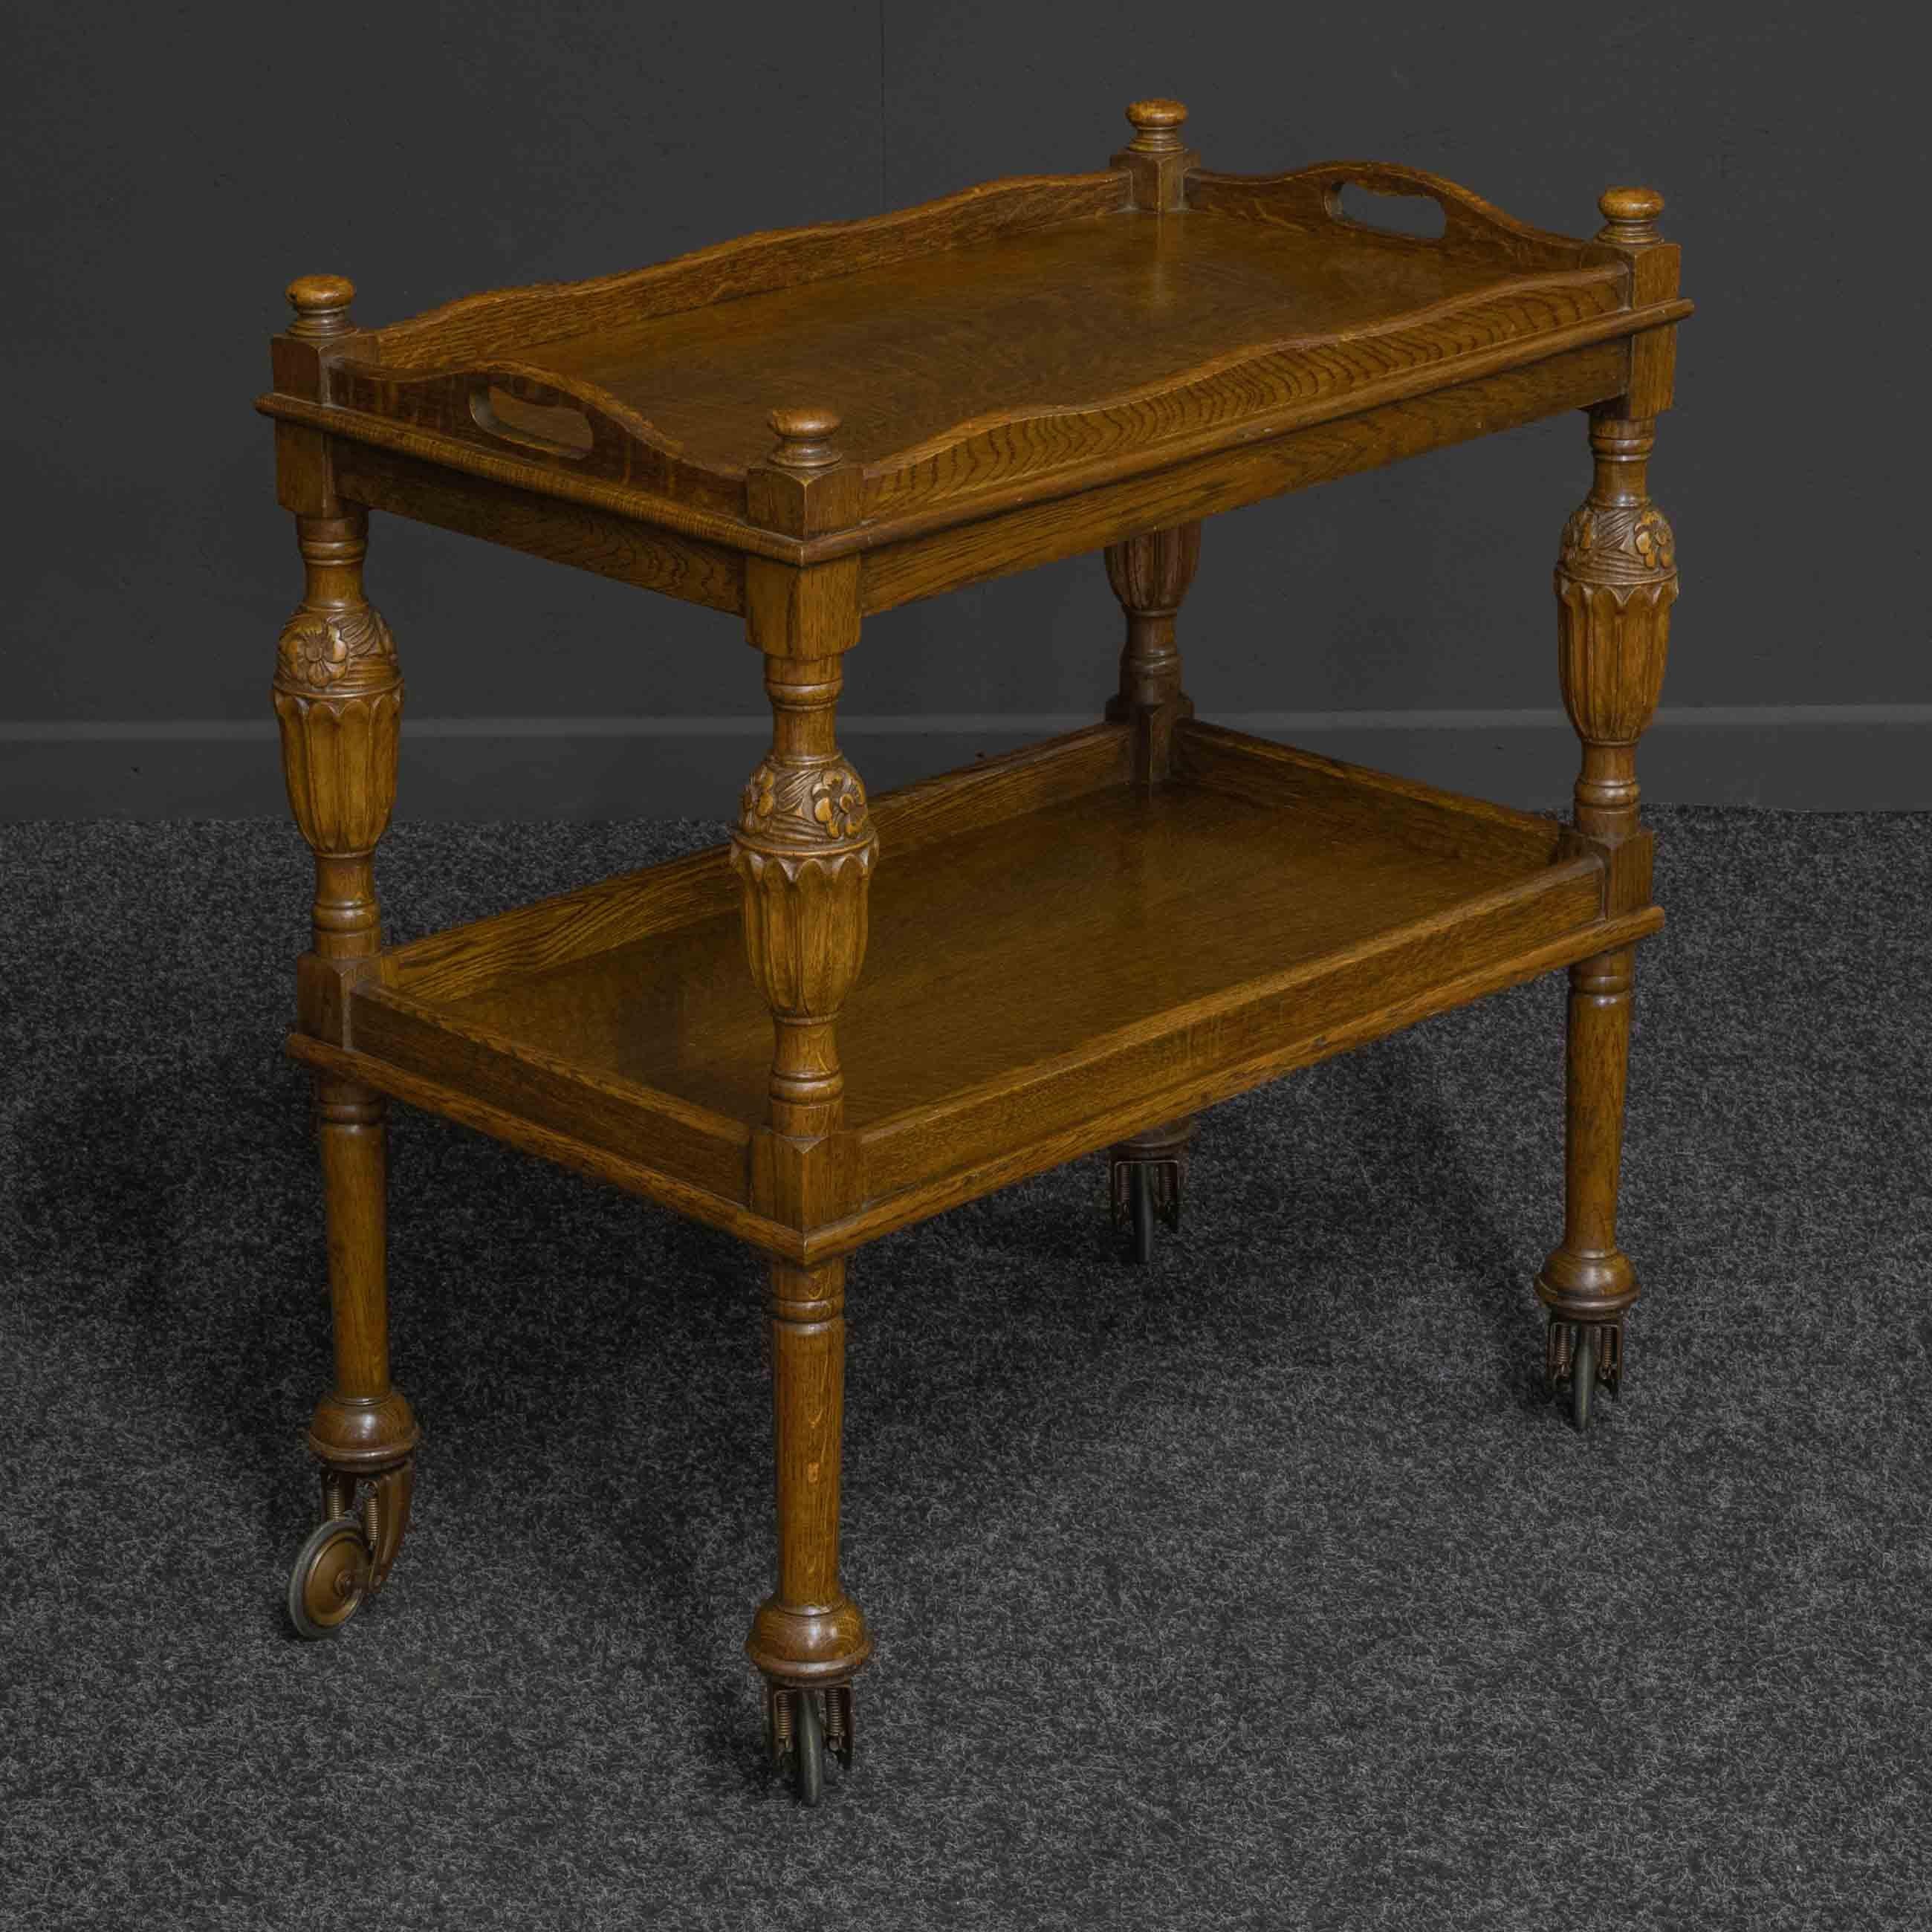 A superb quality oak tea trolley with well carved baluster central supports leading down to turned legs which terminate on the original and rare 'suspension' castors. The quarter veneered tops show beautiful figuring, the upper one a two handled